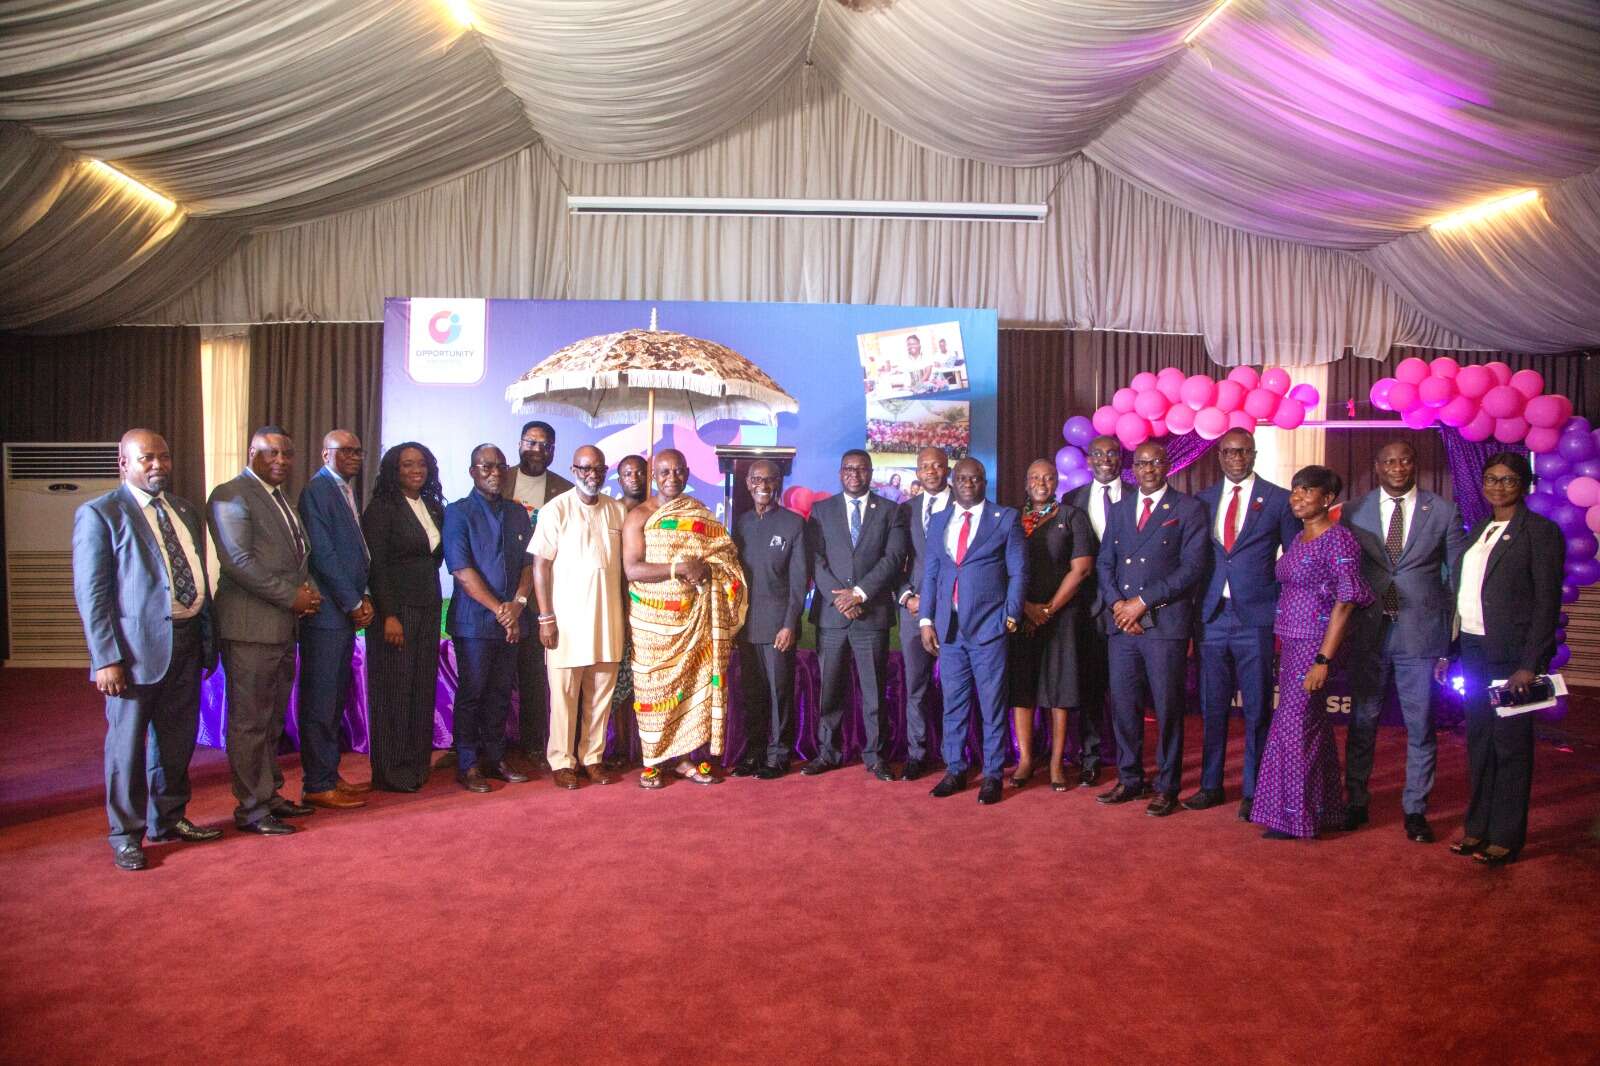 Opportunity International Savings and Loans Ltd. (OISL) launches its 20th Anniversary in Kumasi